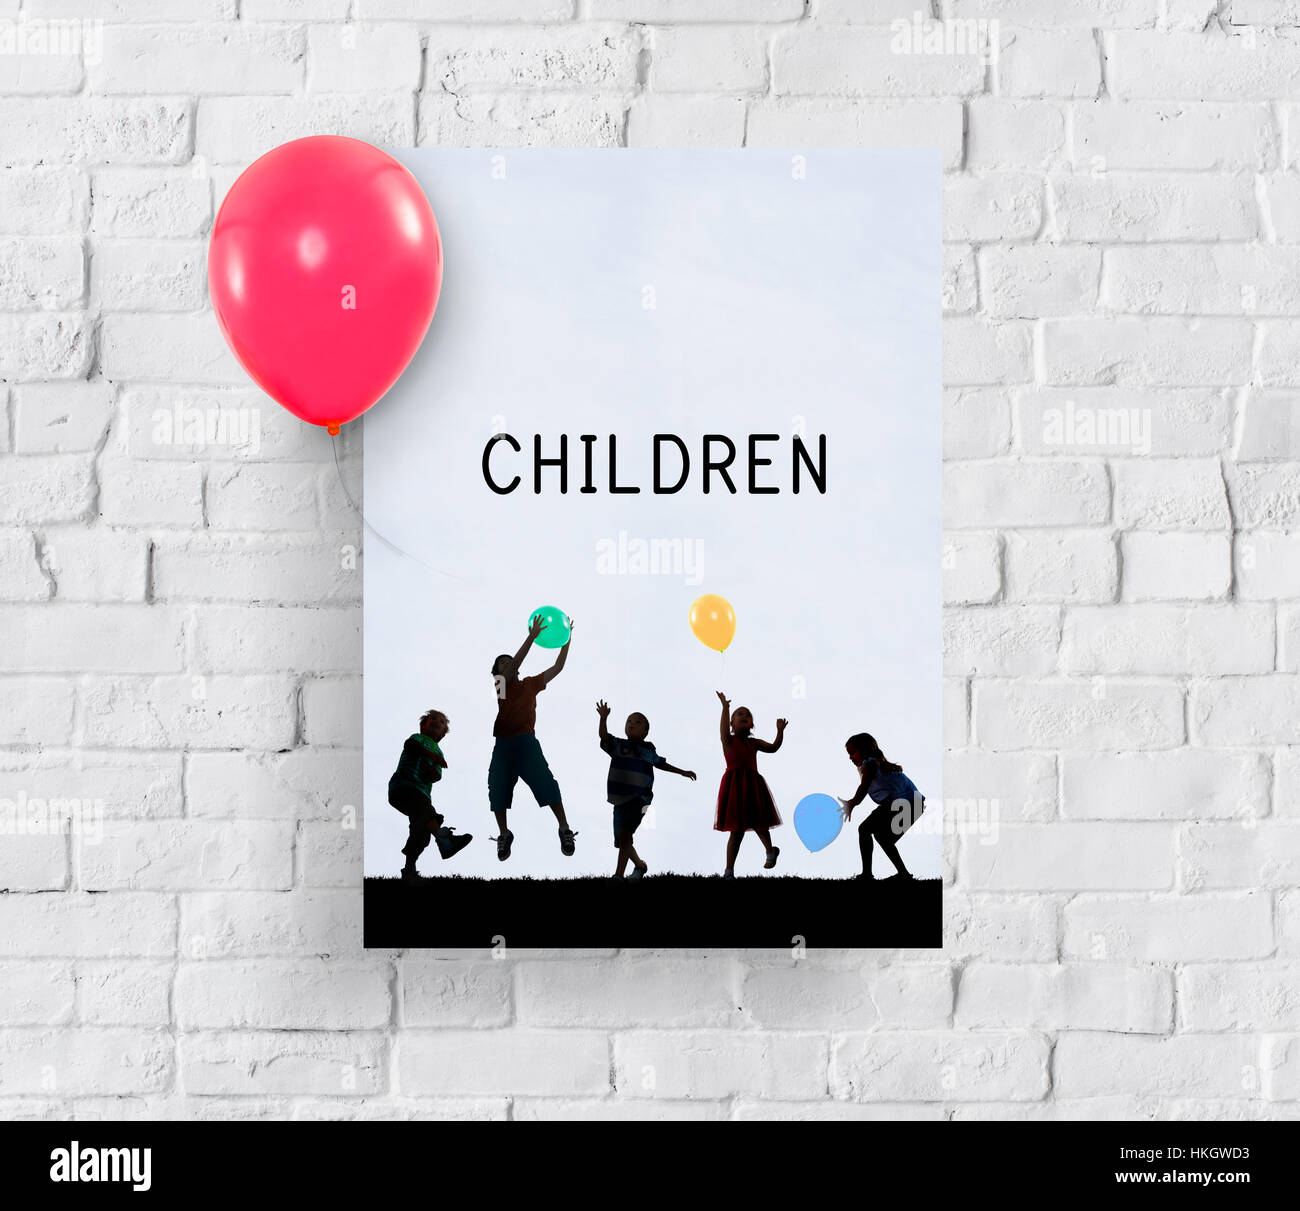 Children Creative Playful Happiness Concept Stock Photo